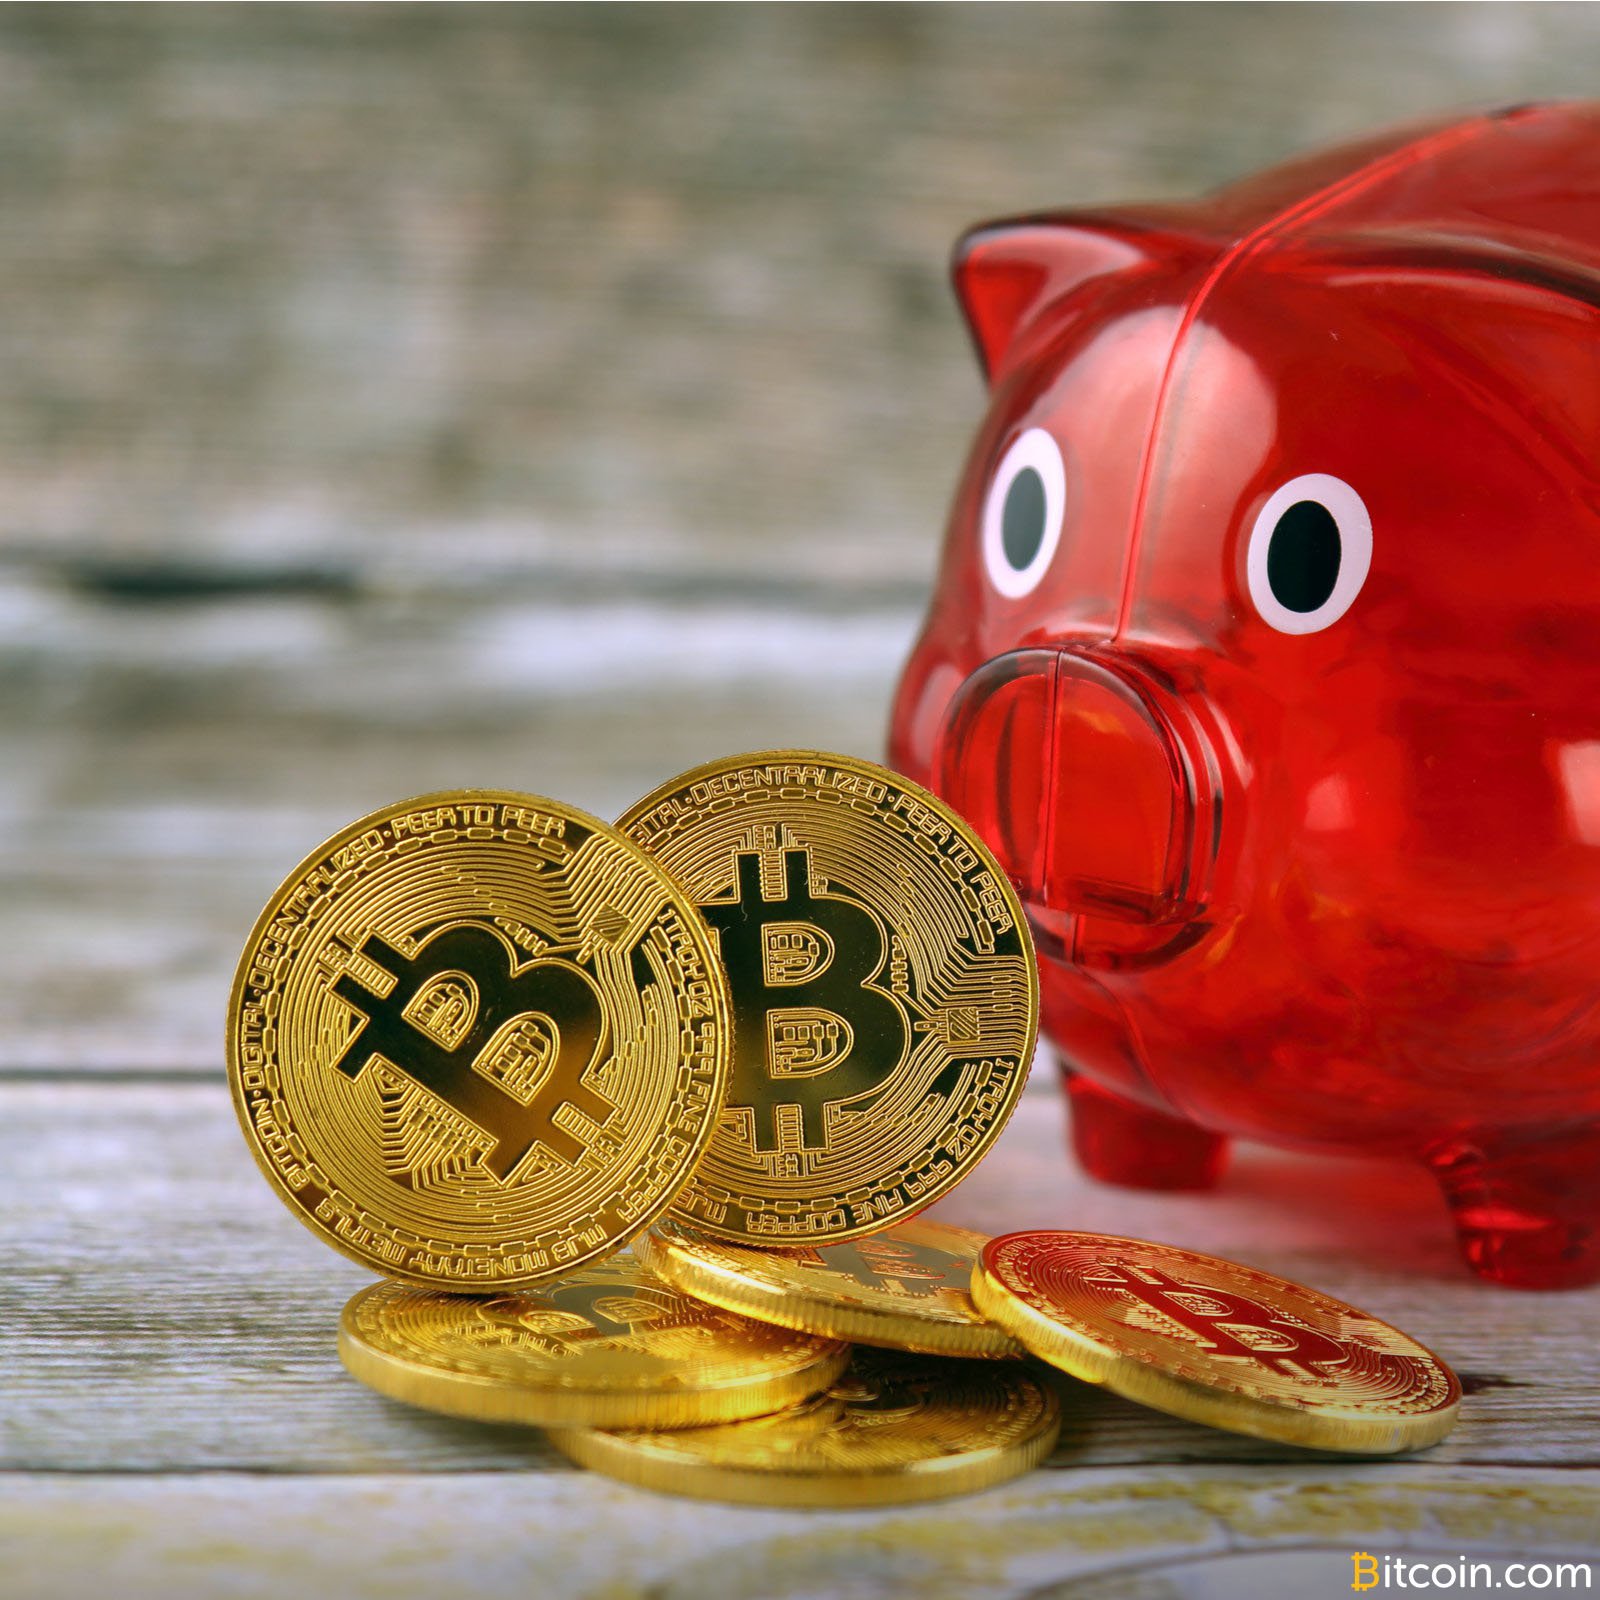 With Bitcoin's Price Above $6000 USD, Satoshi Nakamoto Should Be on Forbes' Rich List